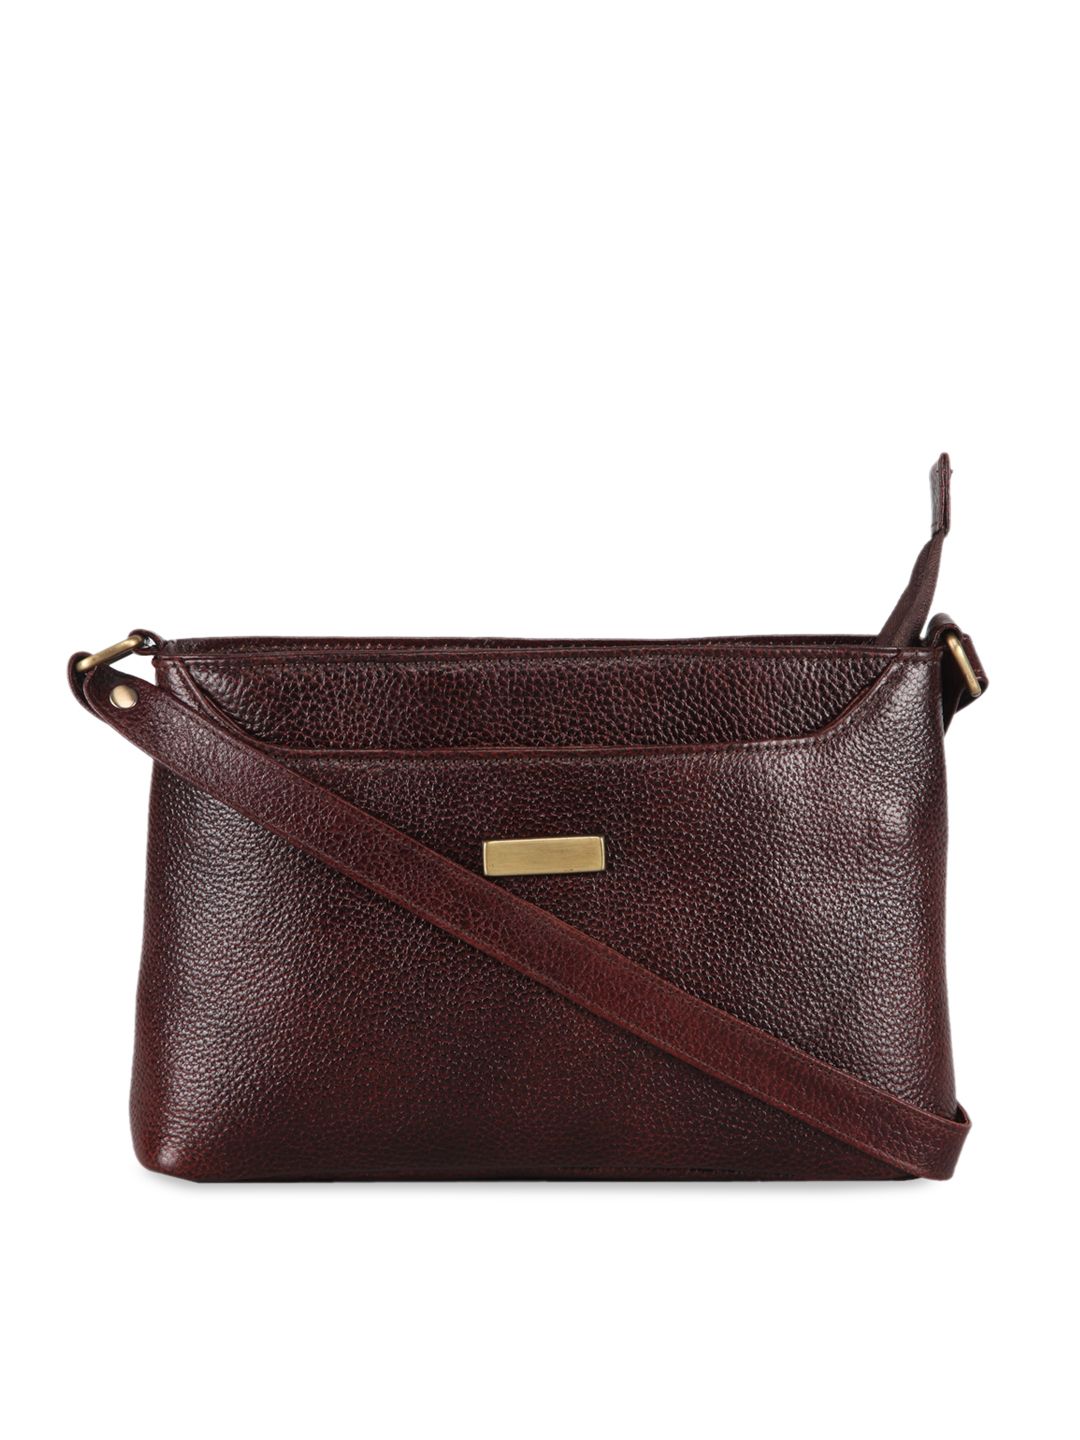 GENWAYNE Brown Textured Leather Structured Sling Bag with Bow Detail Price in India